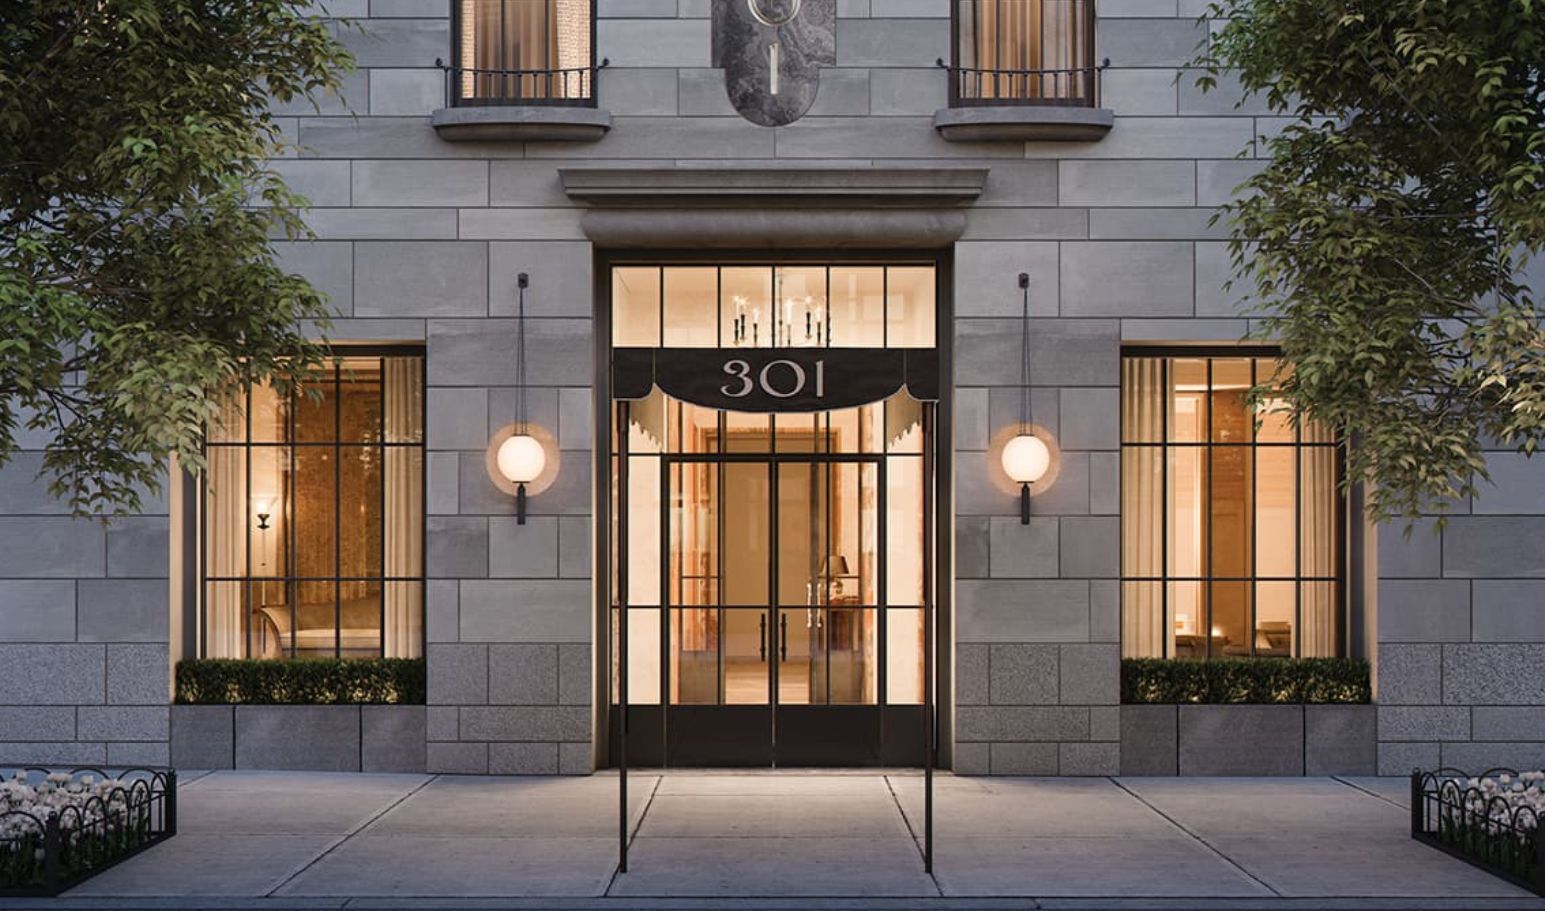 Beckford House is an architectural masterpiece redefining luxury living on the Upper East Side